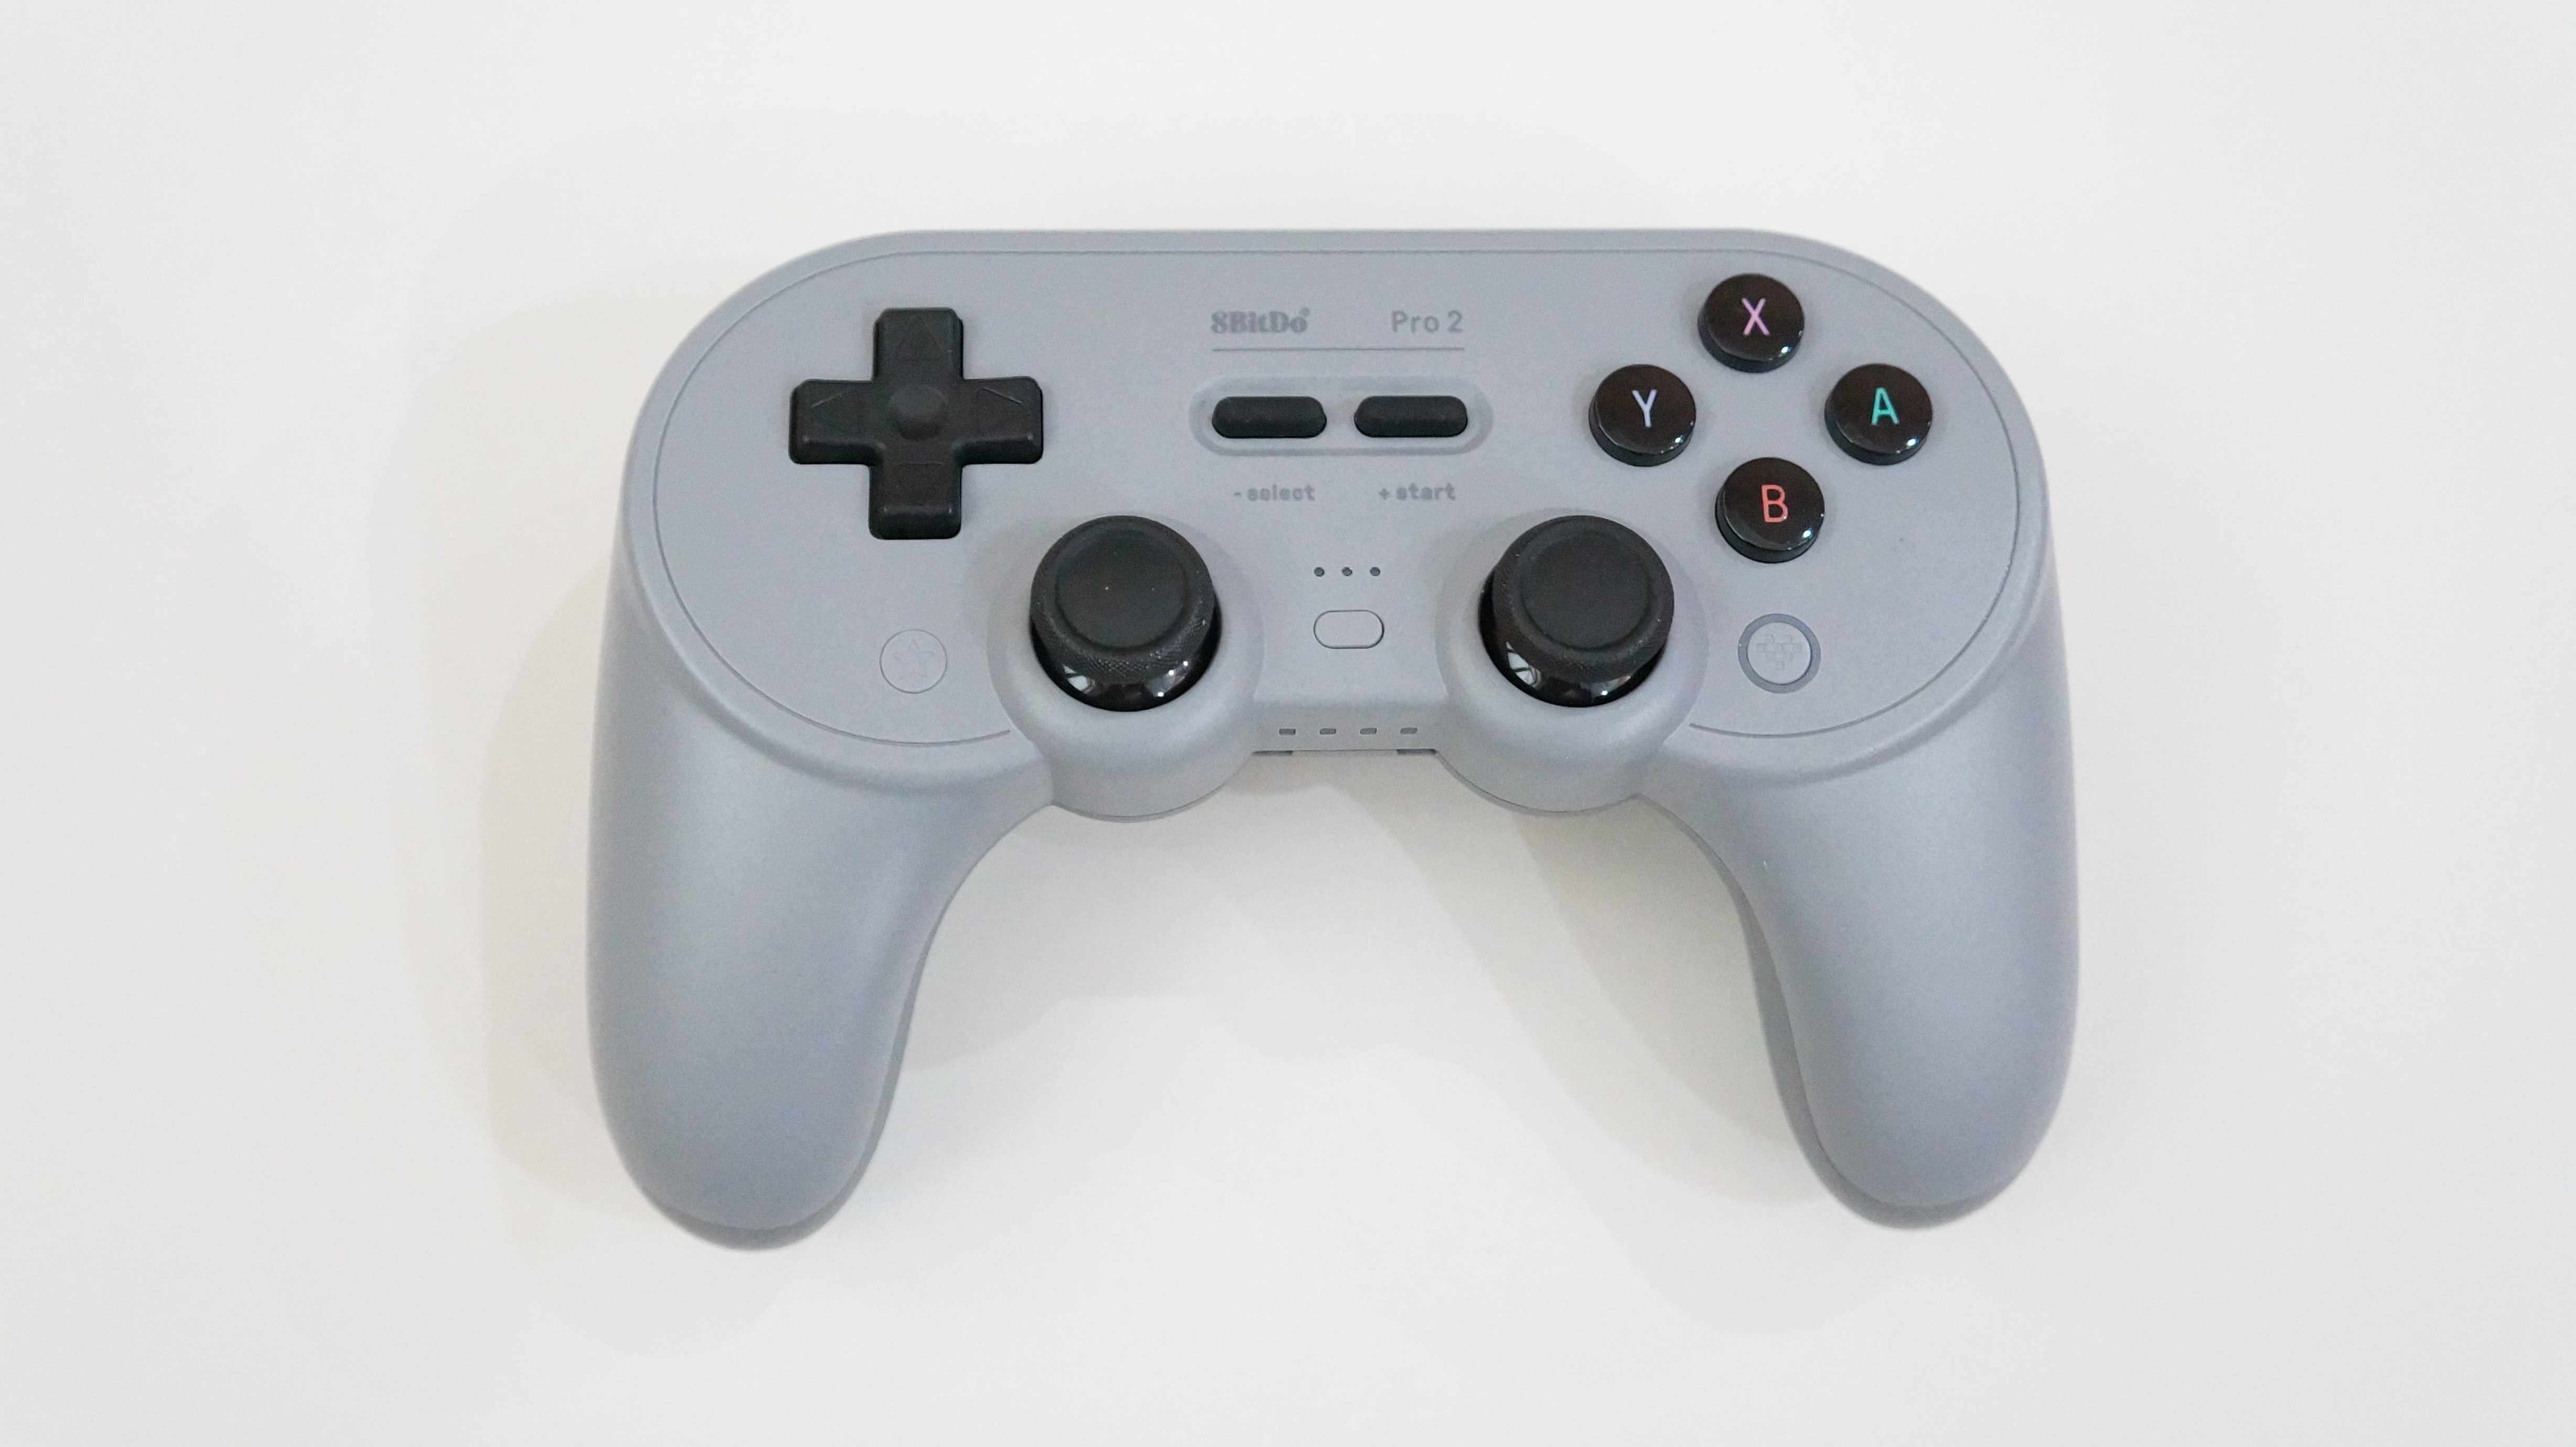 8BitDo Pro 2 Bluetooth Controllers, each for $50